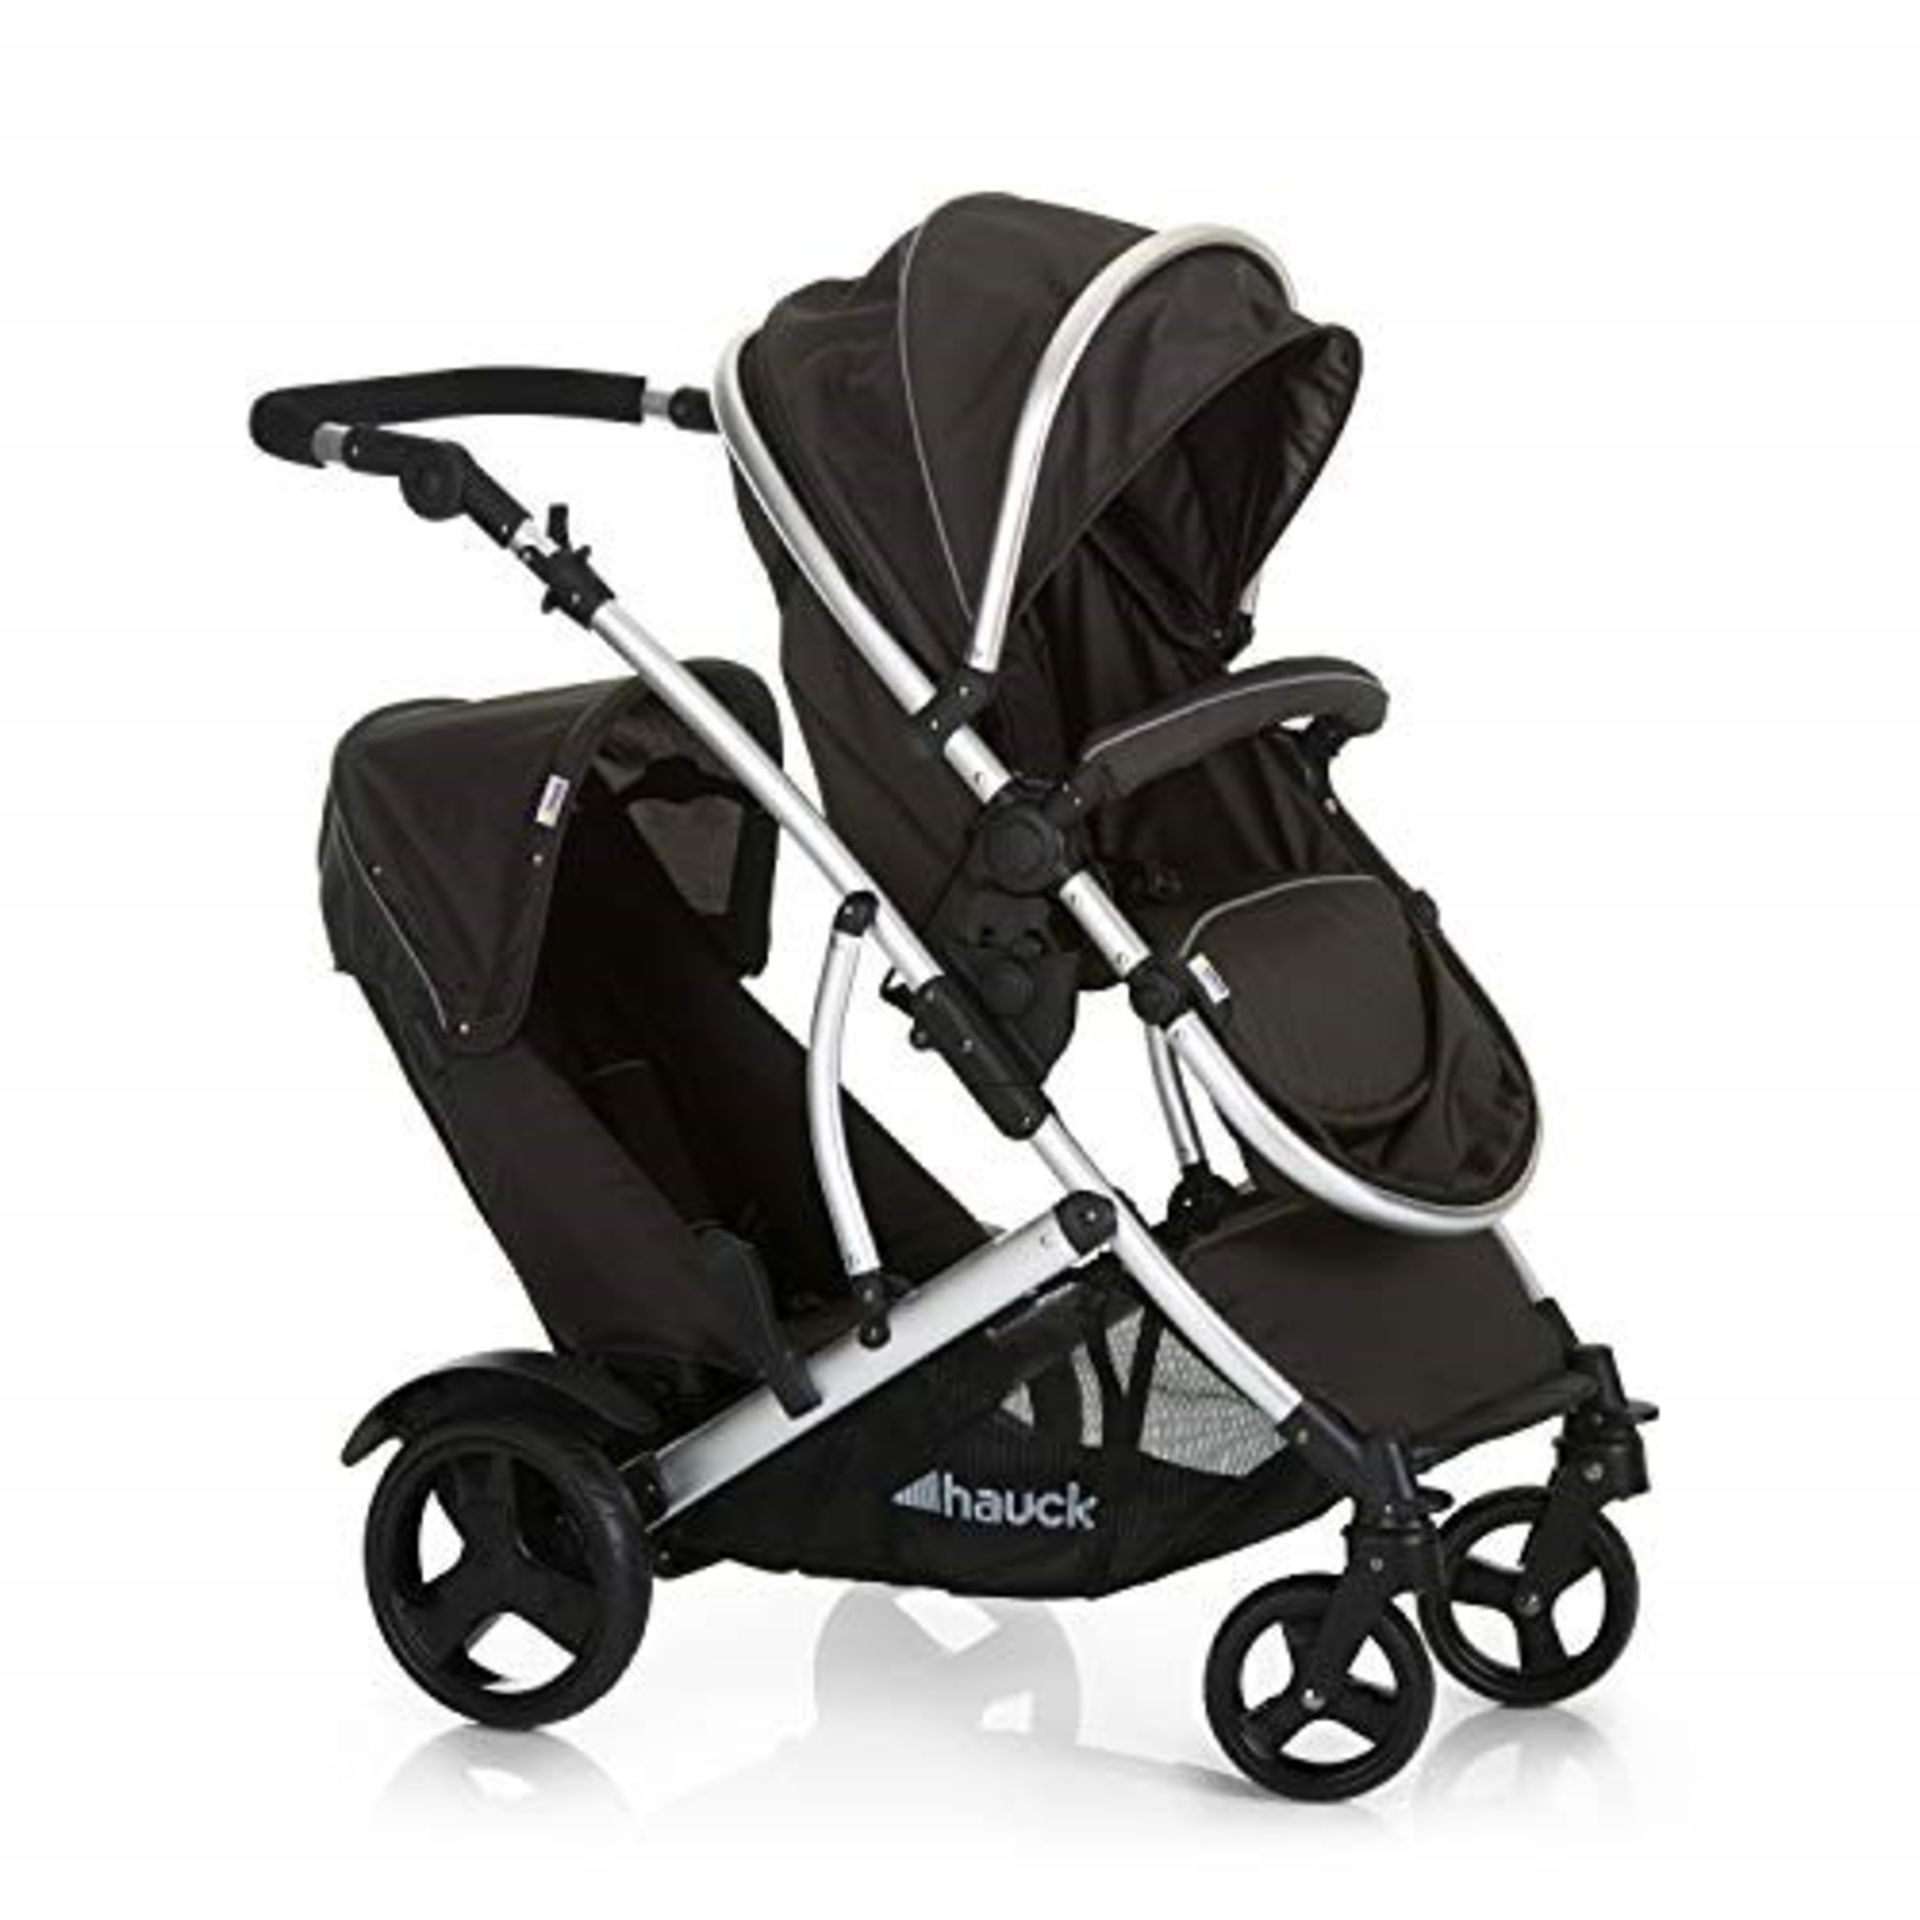 RRP £236.00 Hauck Tandem Double Stroller Duett 2 / for Newborn and Toddler / Pram Convertible to R